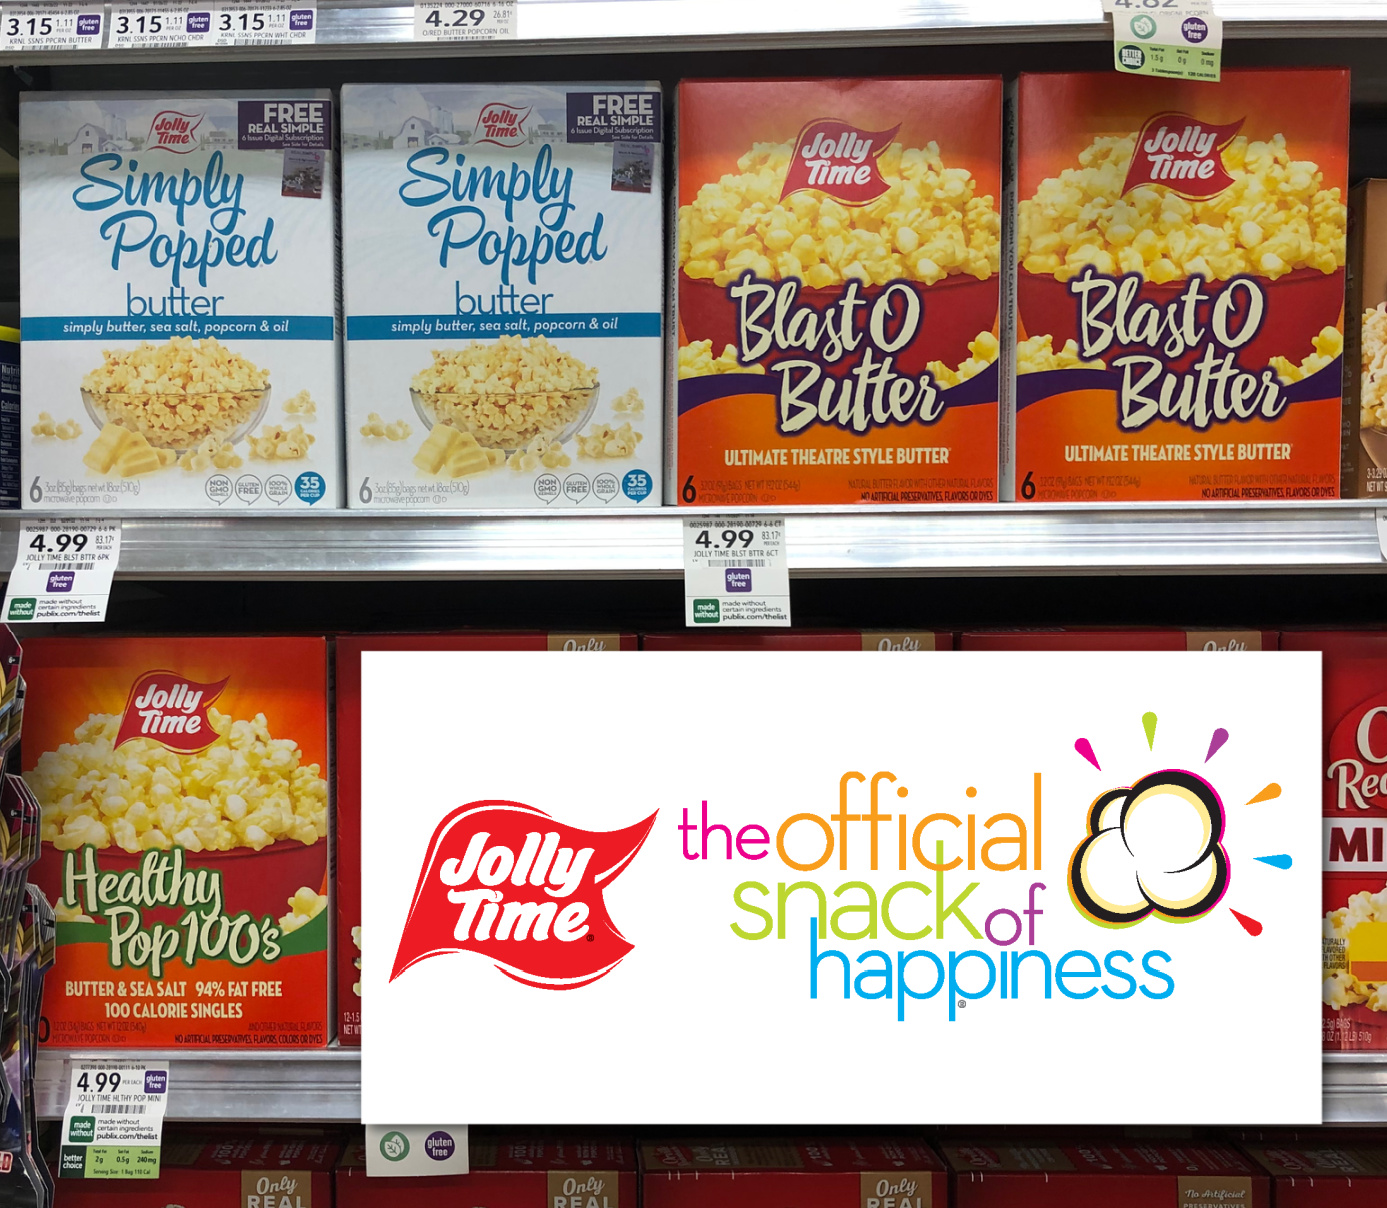 Grab Jolly Time Pop Corn At Publix - Don't Forget To Enter To Win A $50 Publix Gift Card on I Heart Publix